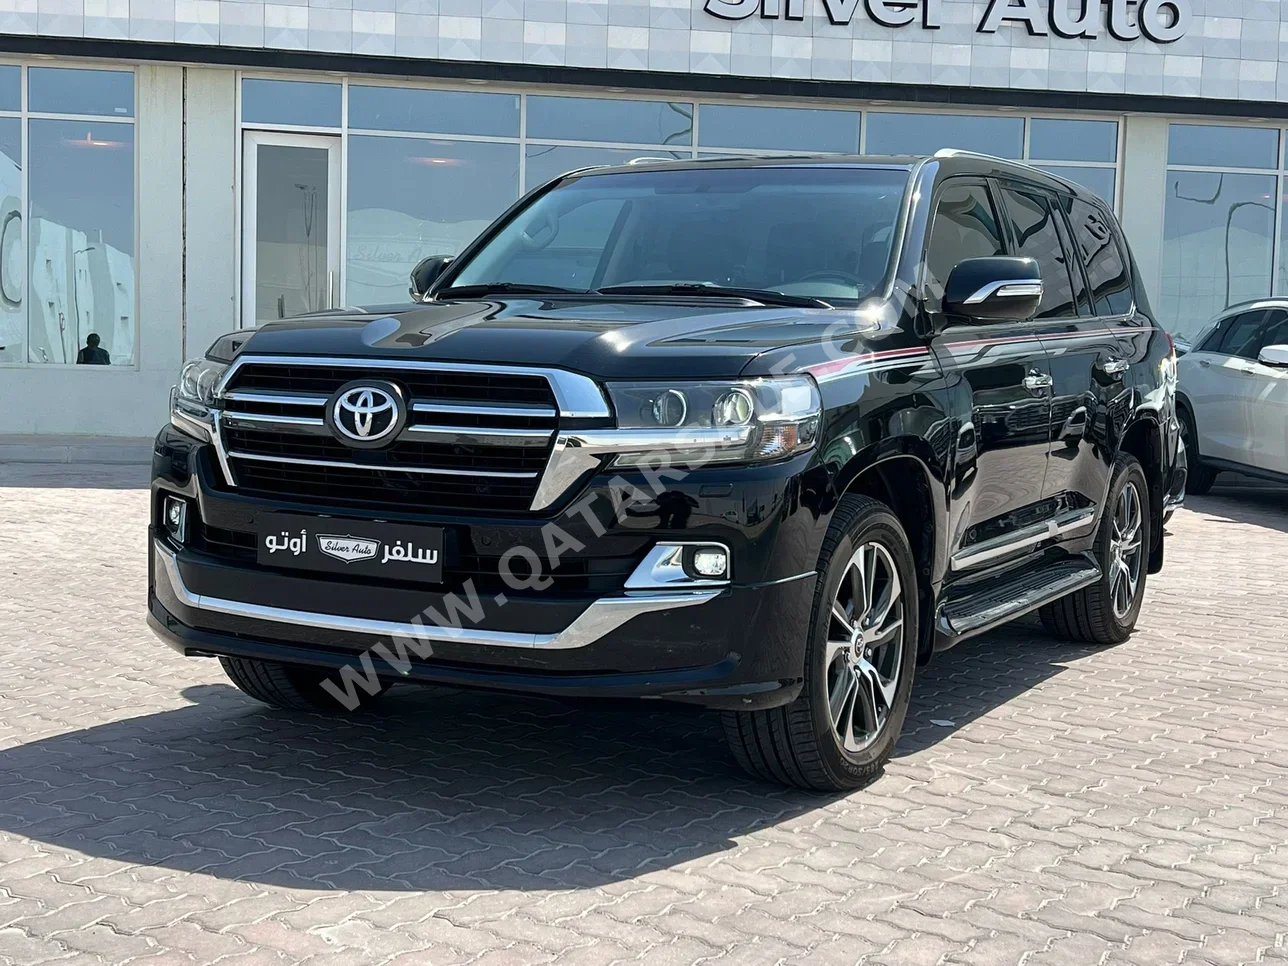 Toyota  Land Cruiser  GXR- Grand Touring  2020  Automatic  78,000 Km  8 Cylinder  Four Wheel Drive (4WD)  SUV  Black